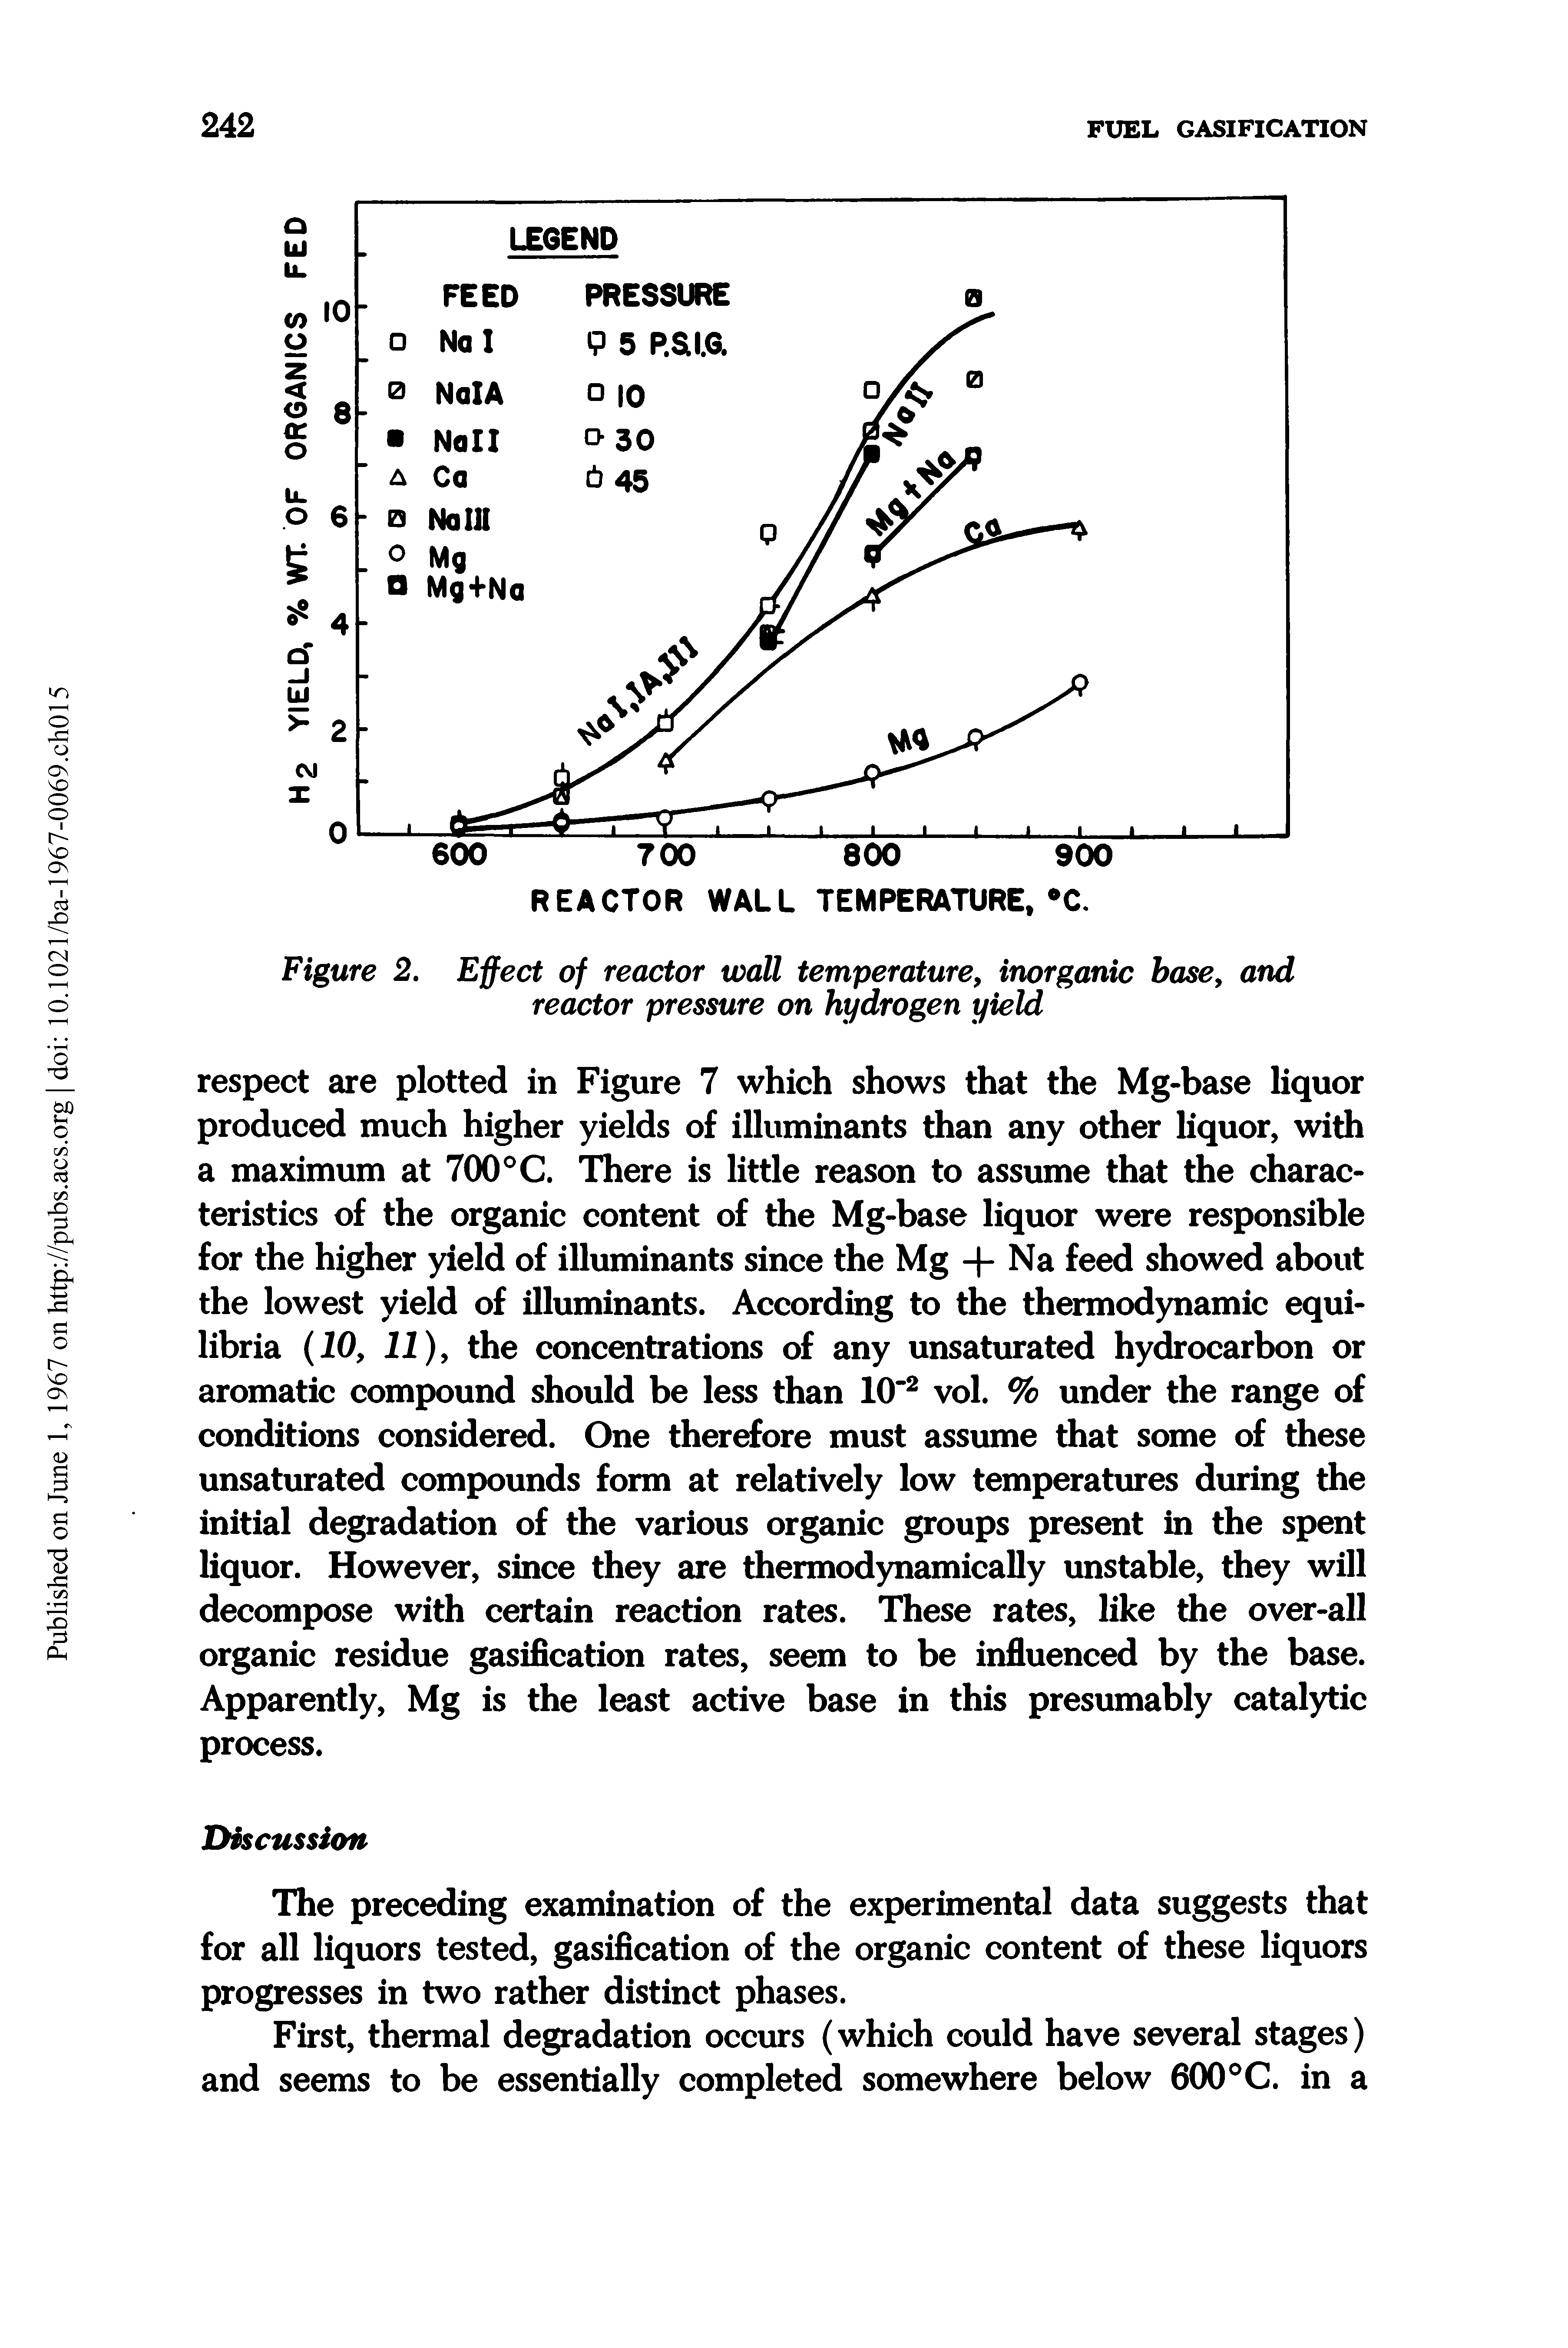 Figure 2. Effect of reactor wall temperature, inorganic base, and reactor pressure on hydrogen yield...